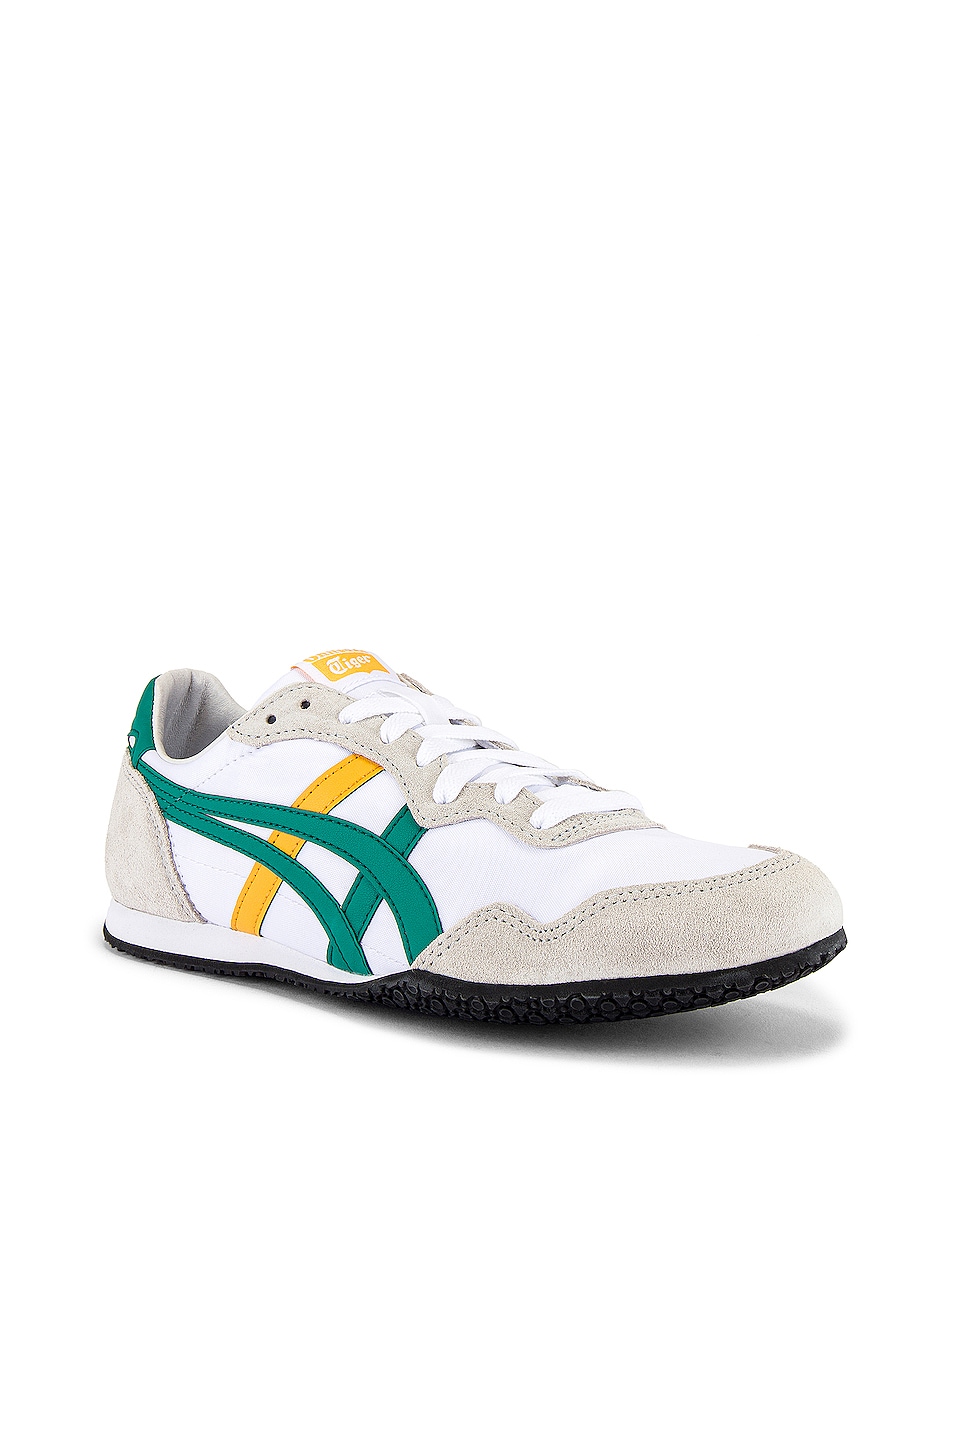 Image 1 of Onitsuka Tiger Serrano in White & Jelly Bean